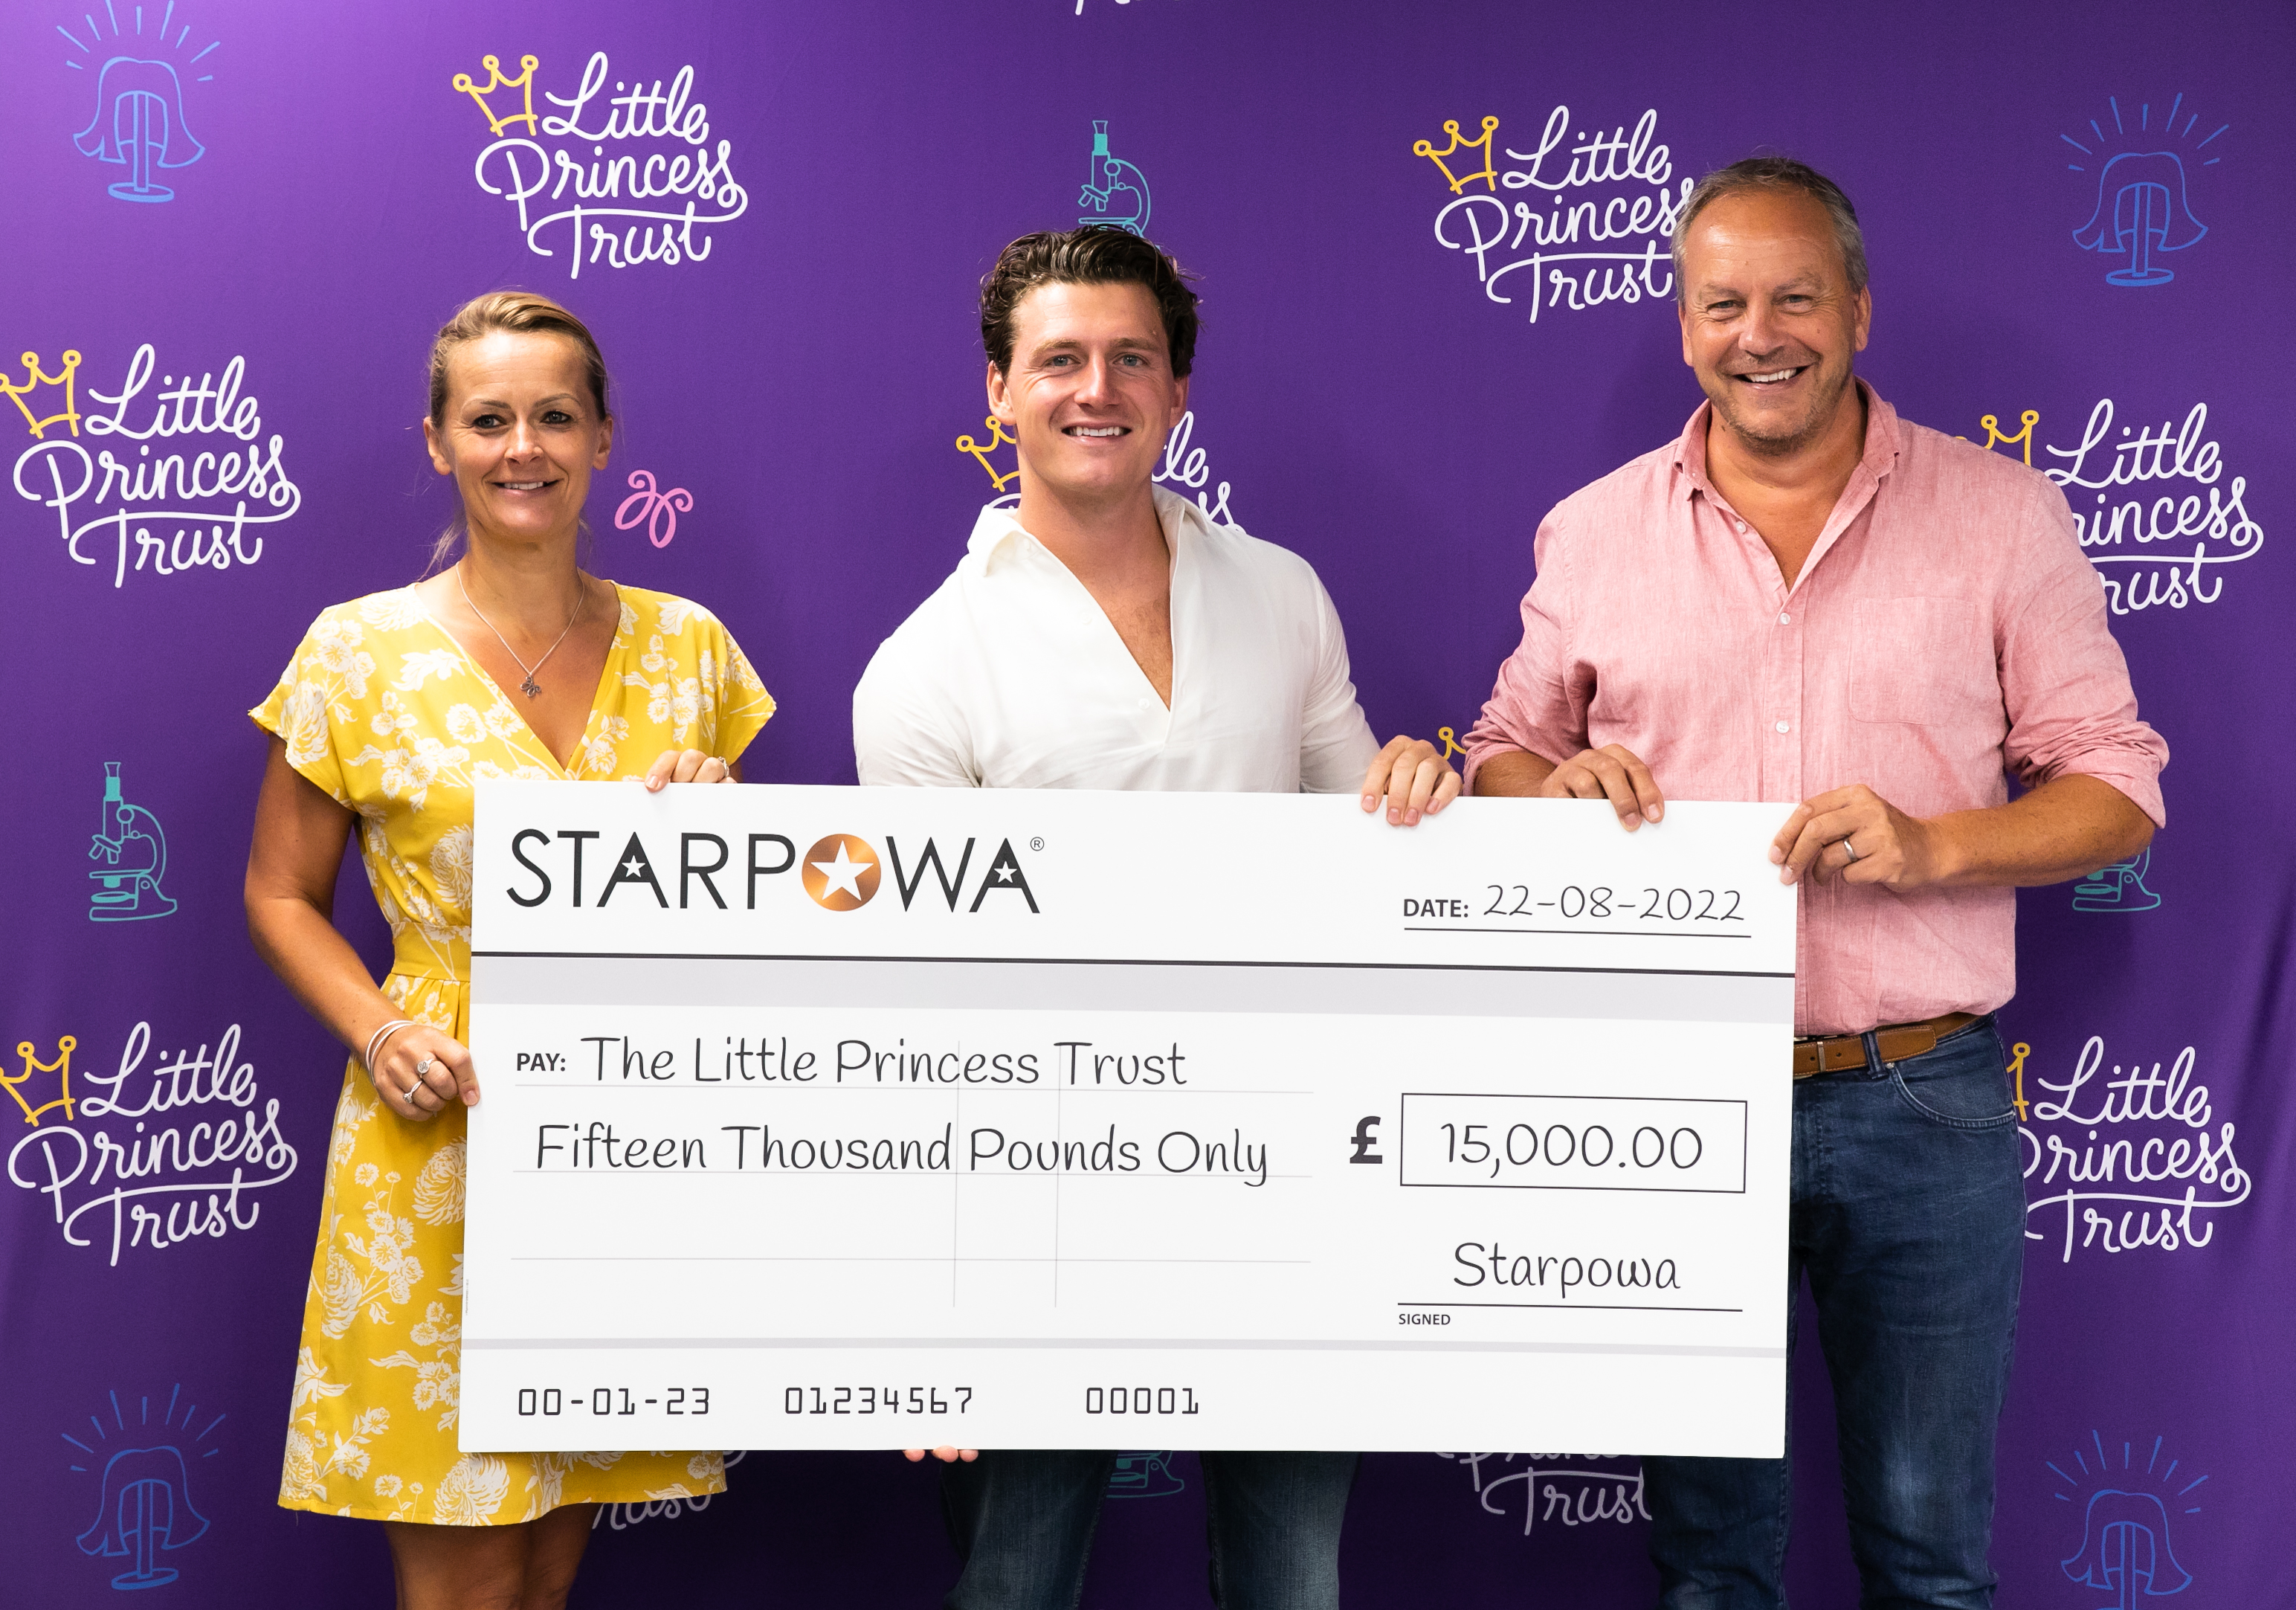 Johnny Gallagher (centre) presents a cheque of £15,000 to The Little Princess Trust to Wendy Tarplee-Morris and Phil Brace.